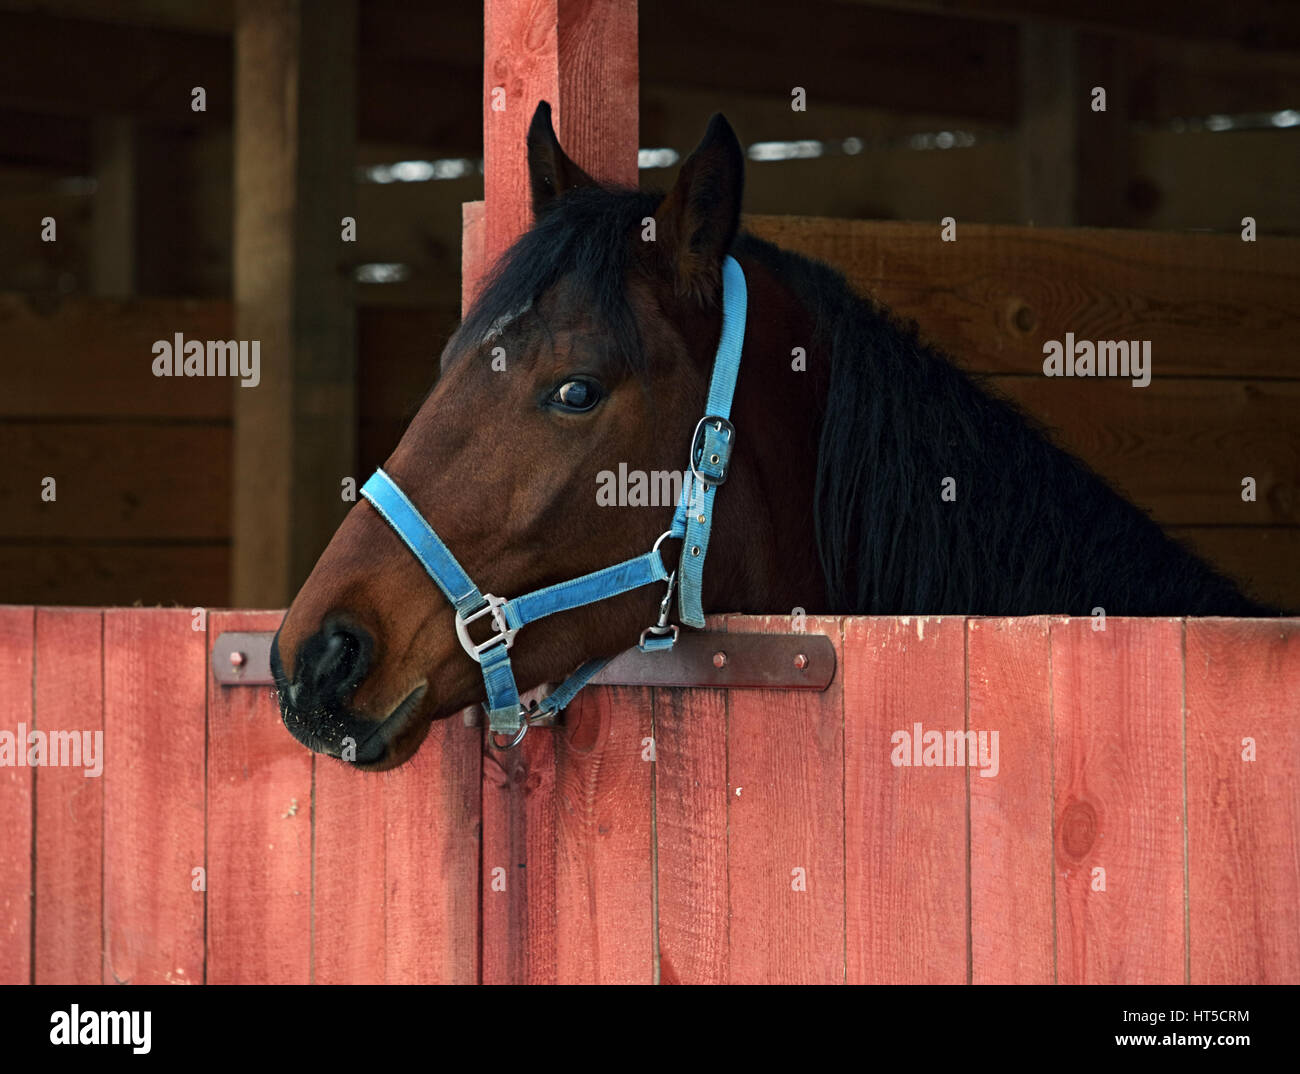 Thoroughbred horse looking at stable door Stock Photo